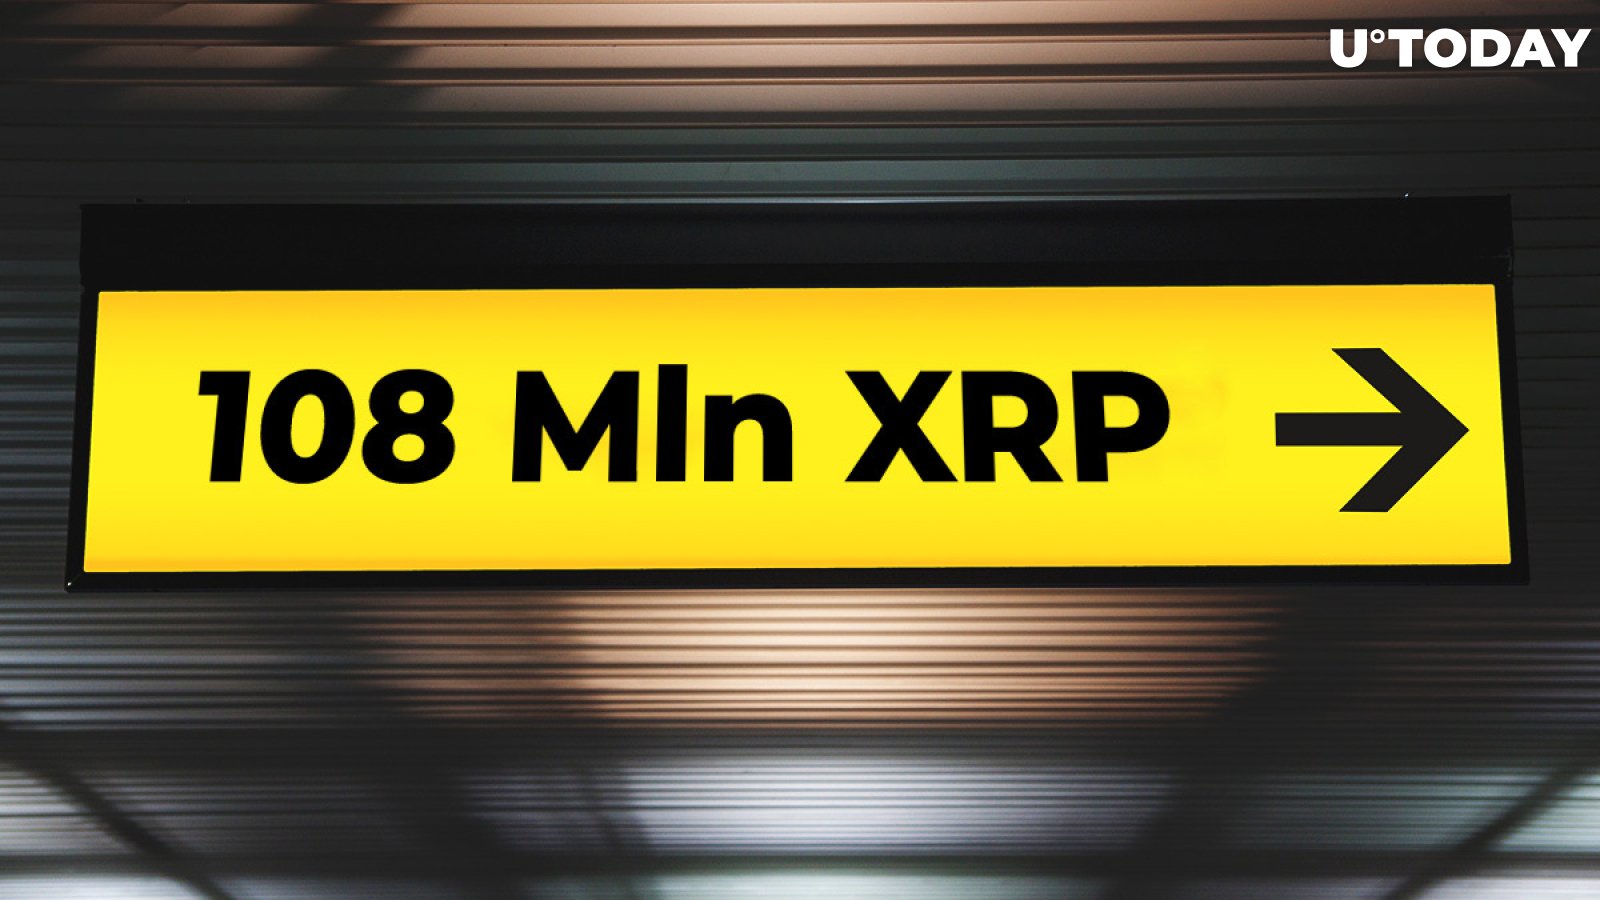 Almost 108 Mln XRP Sent By Major Exchanges, Including Japanese Bitbank